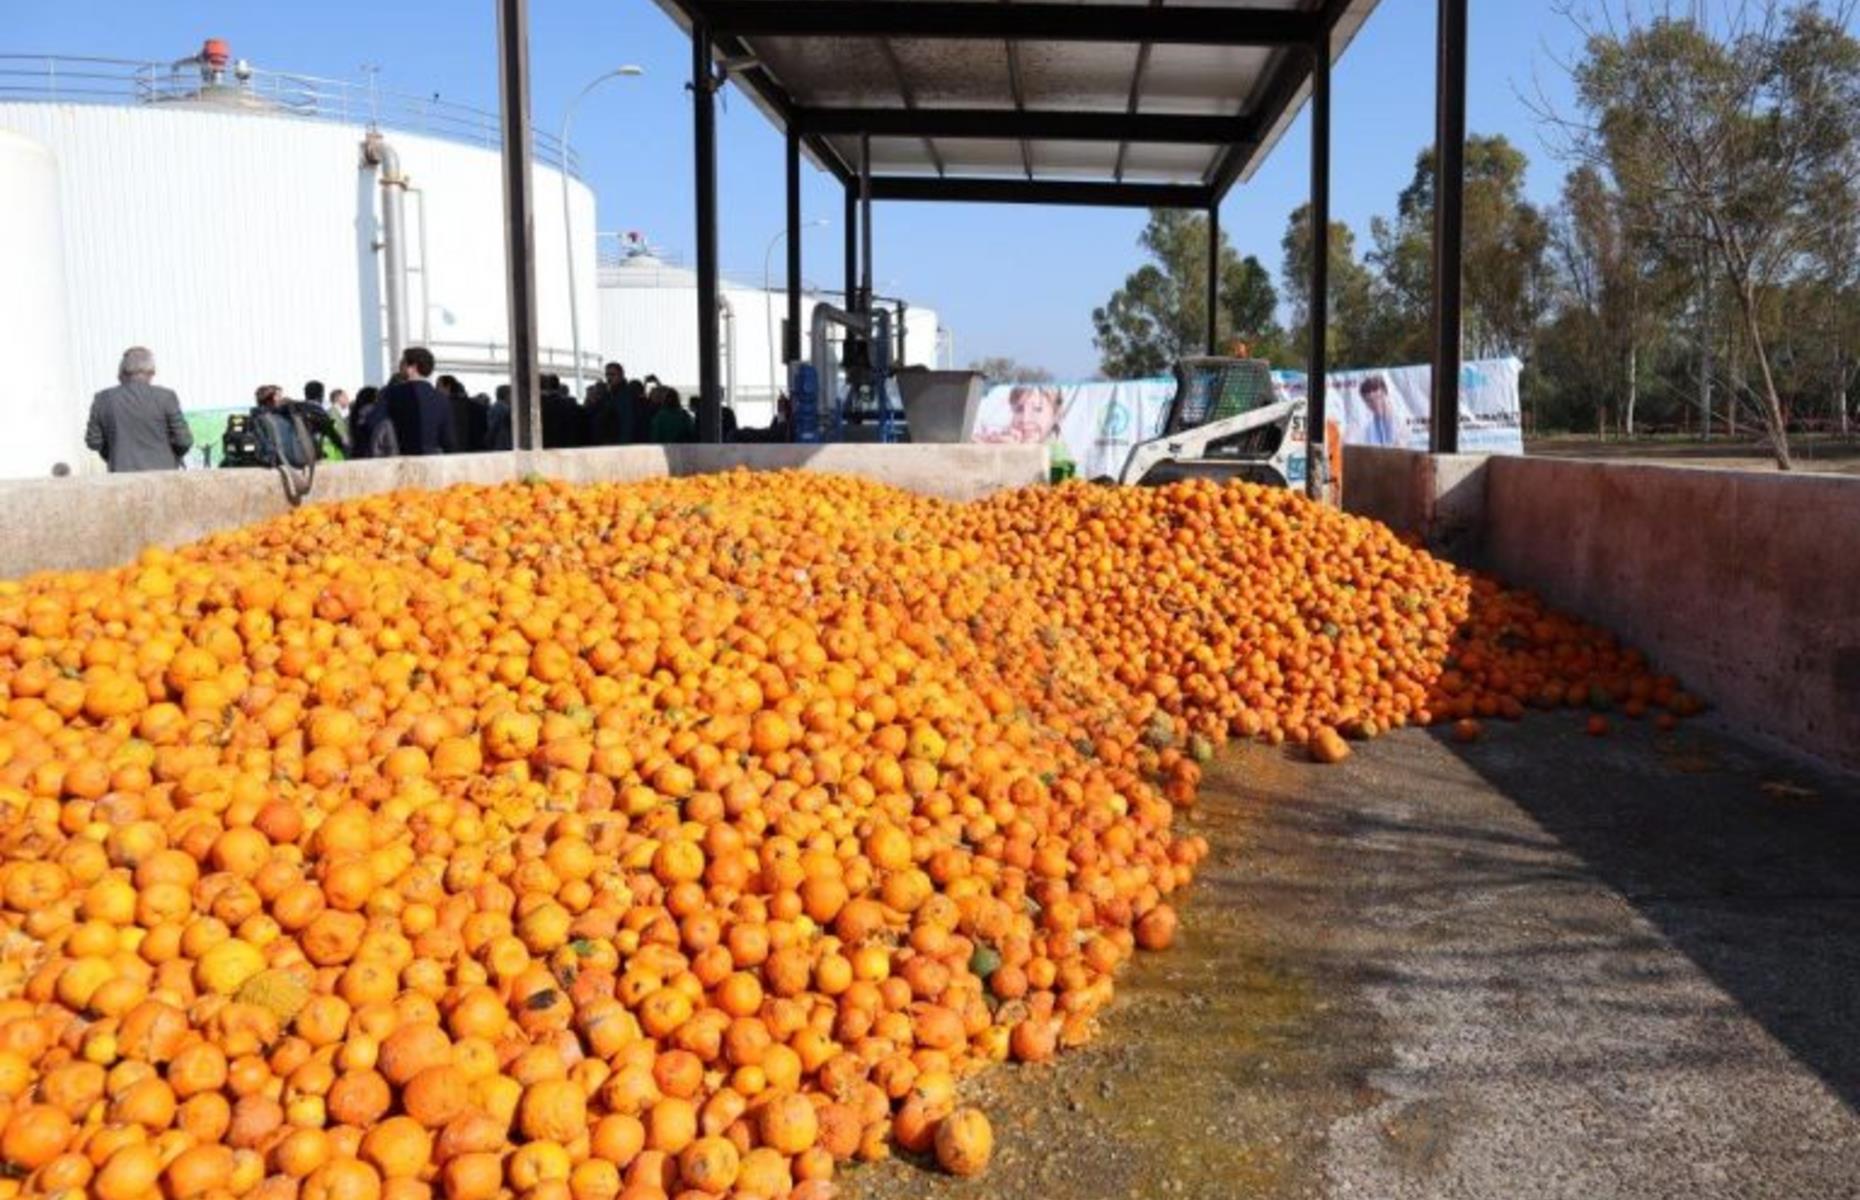 Electricity for 73,000 homes... from oranges